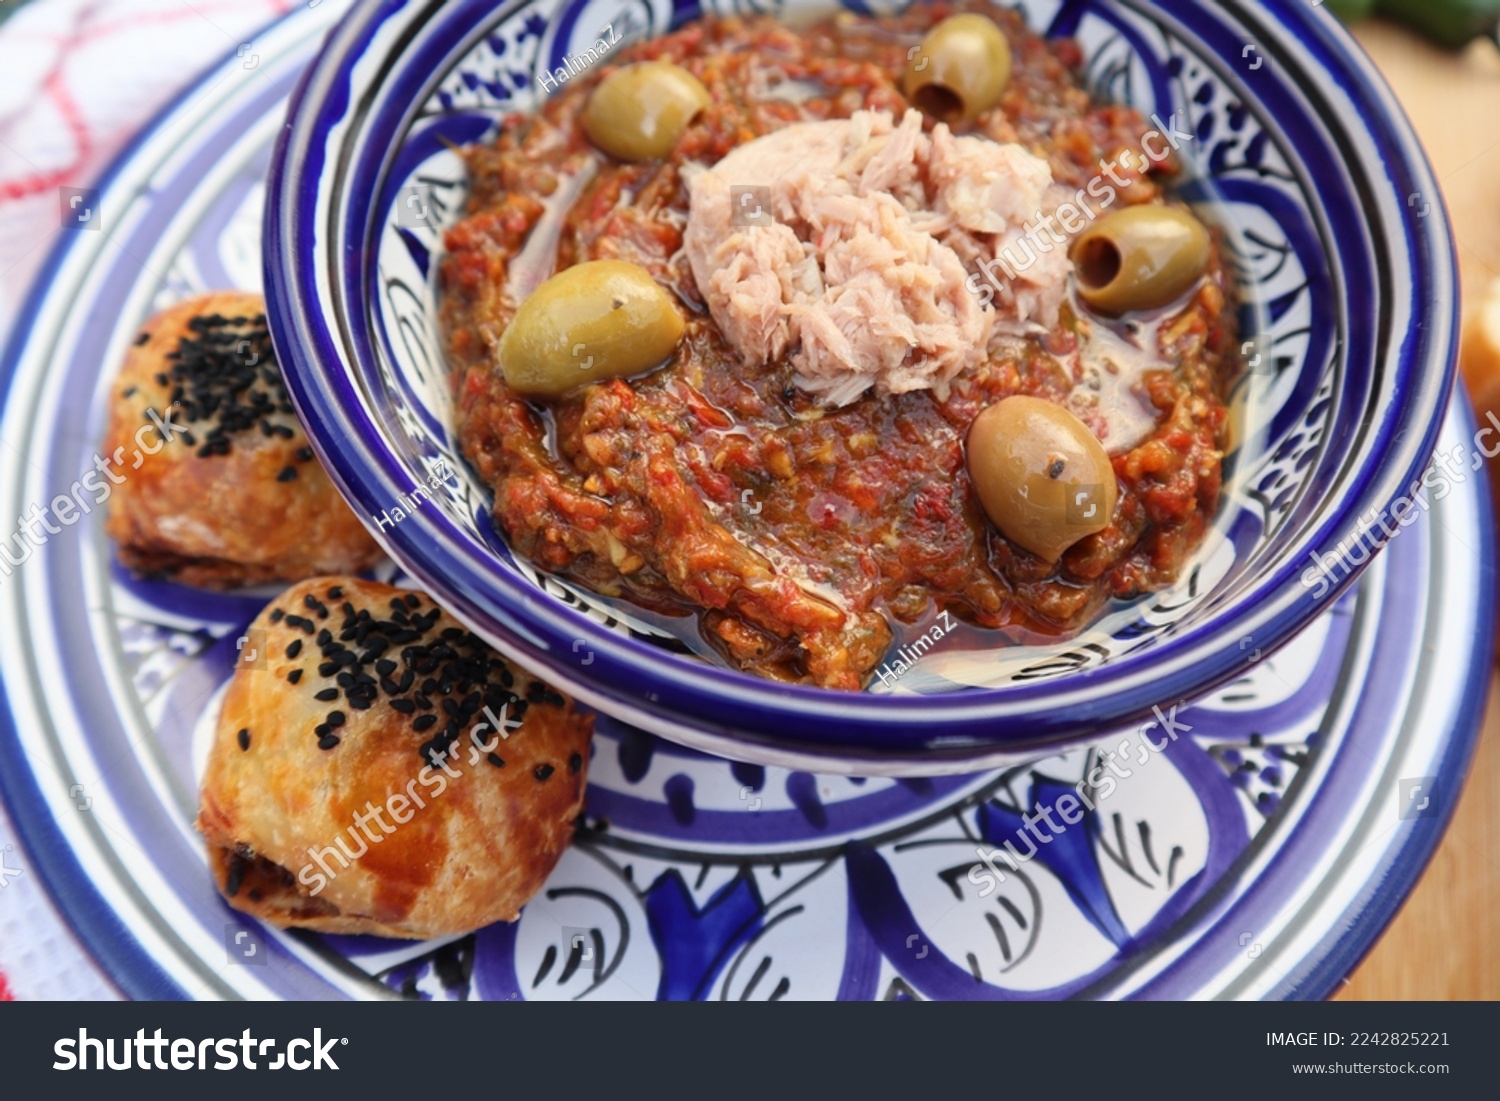 Grilled vegetables Tunisian salad with tuna and olives on top, close up view in Libyan traditional tableware with mini bread on the side  - daylight shoot  #2242825221